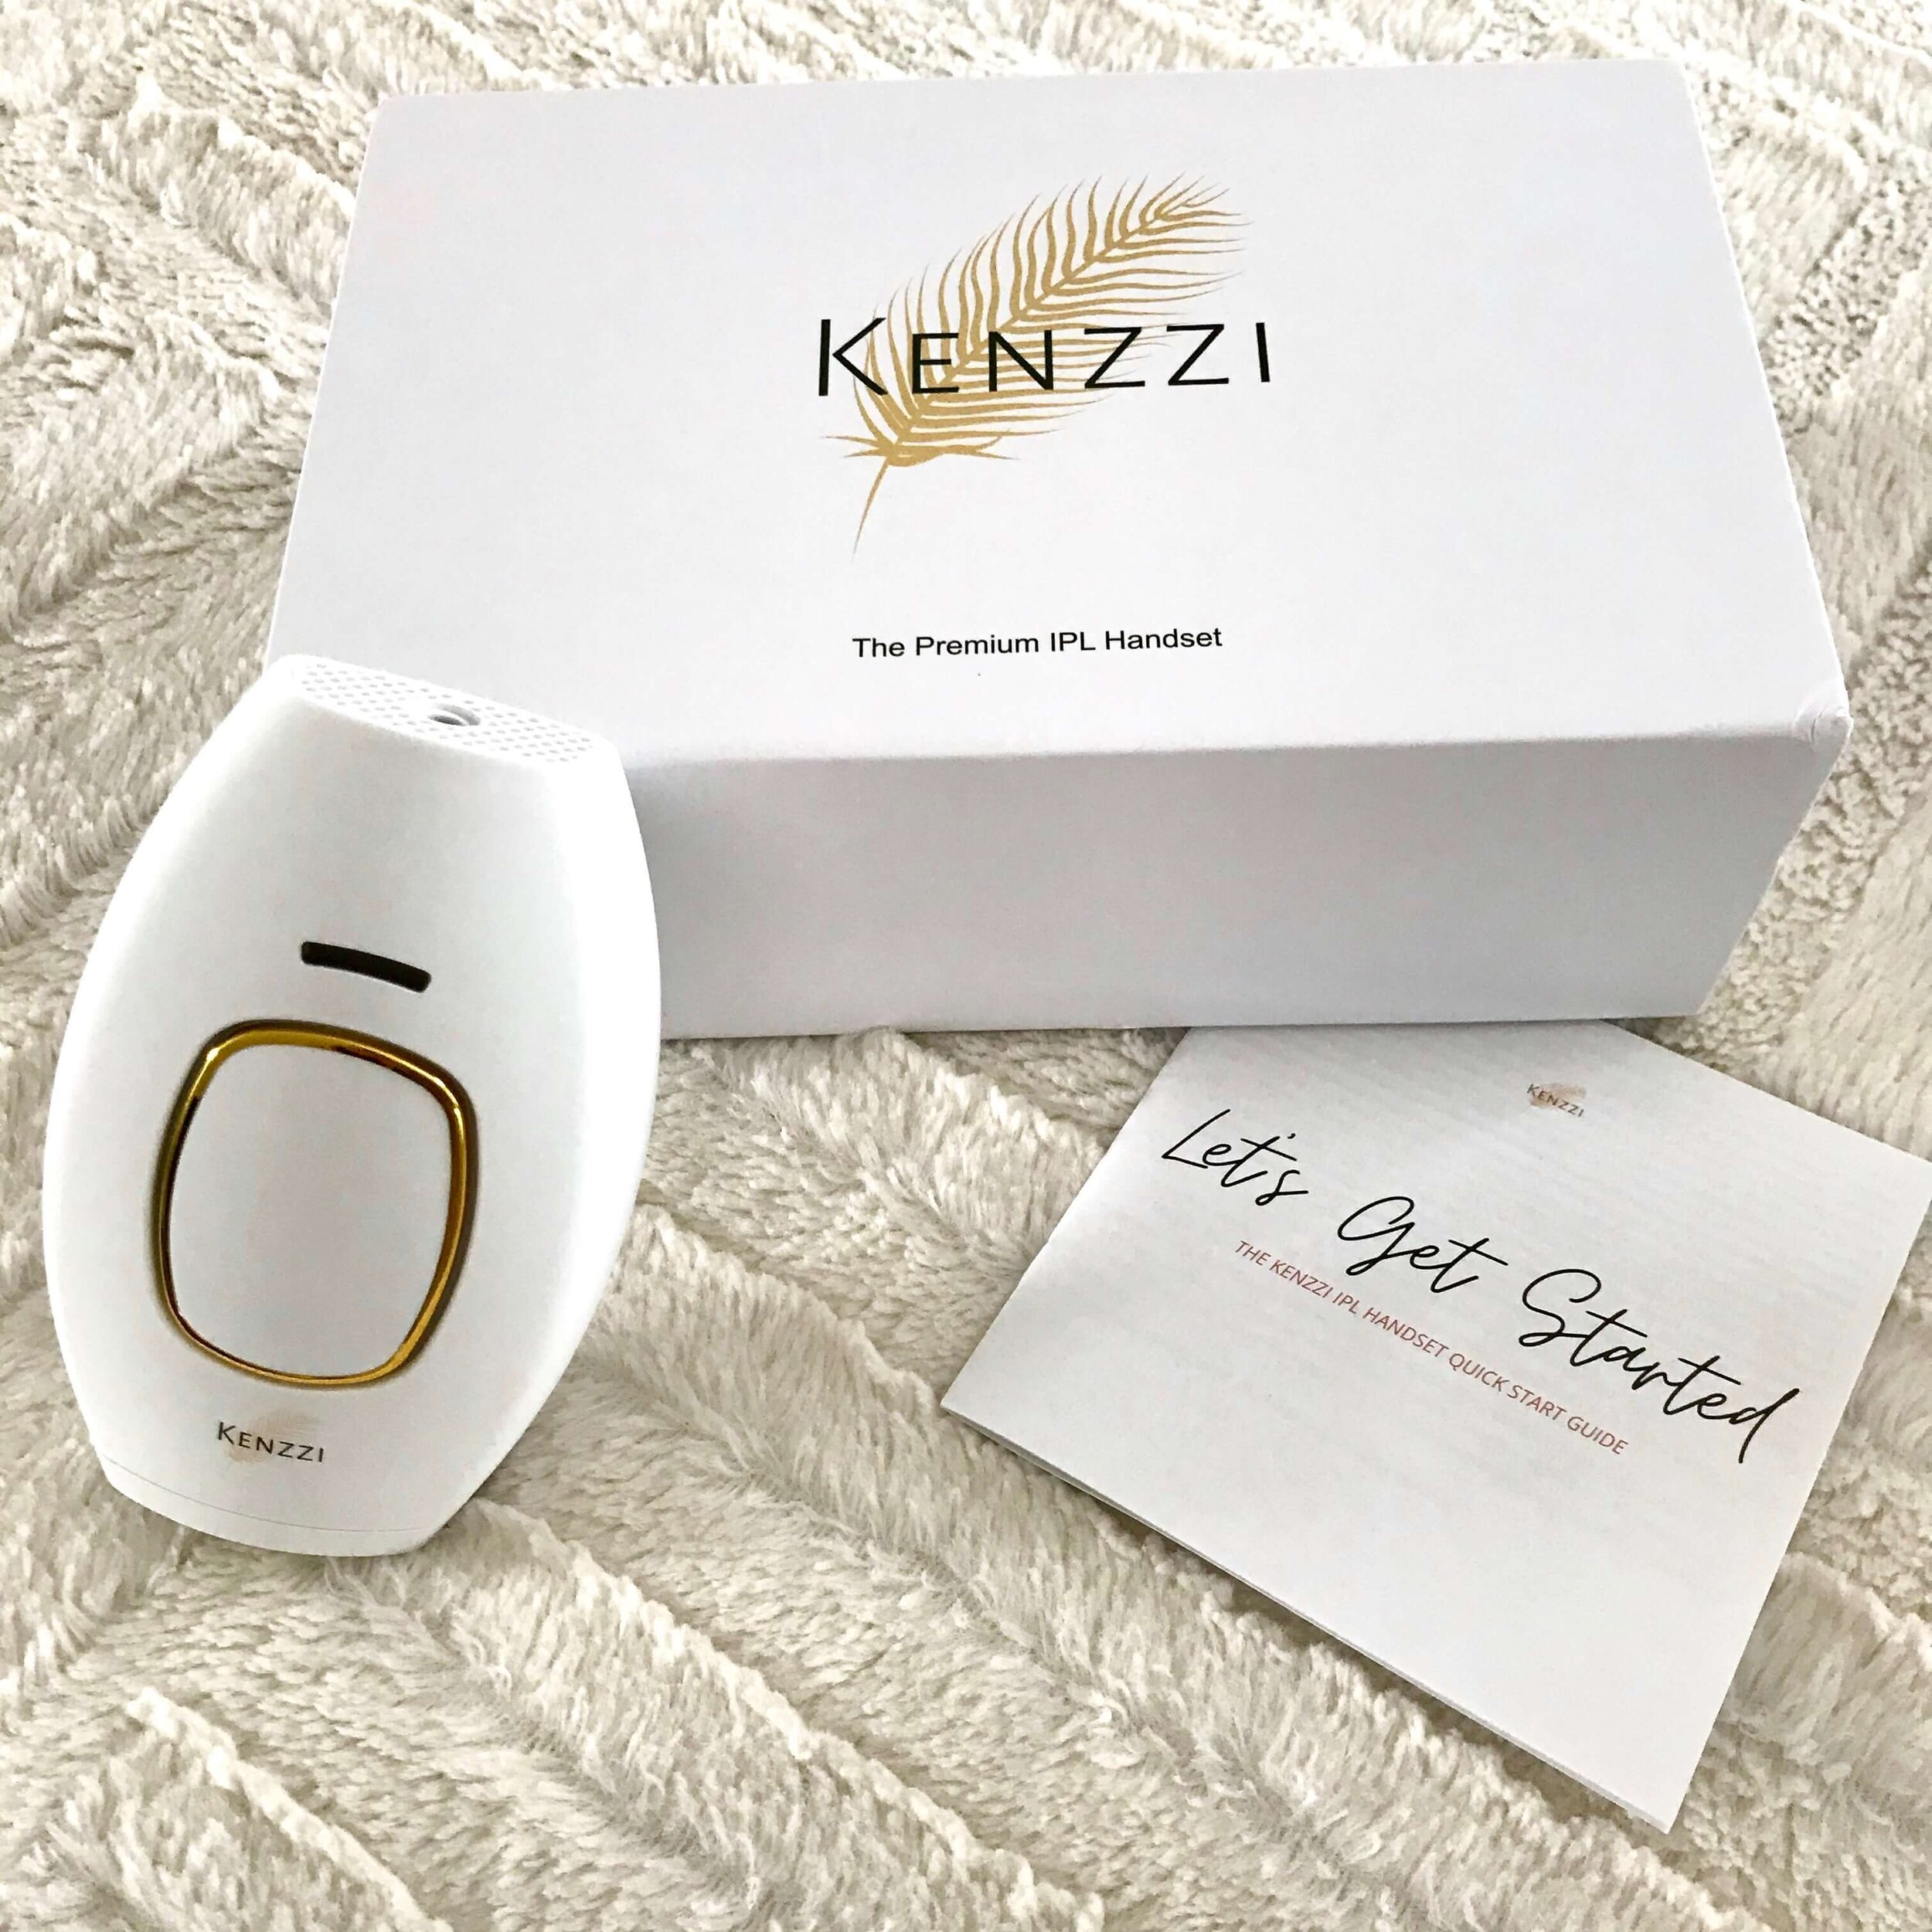 10 Kenzzi Laser Hair Removal Reviews 2023 - Buyer's Guide